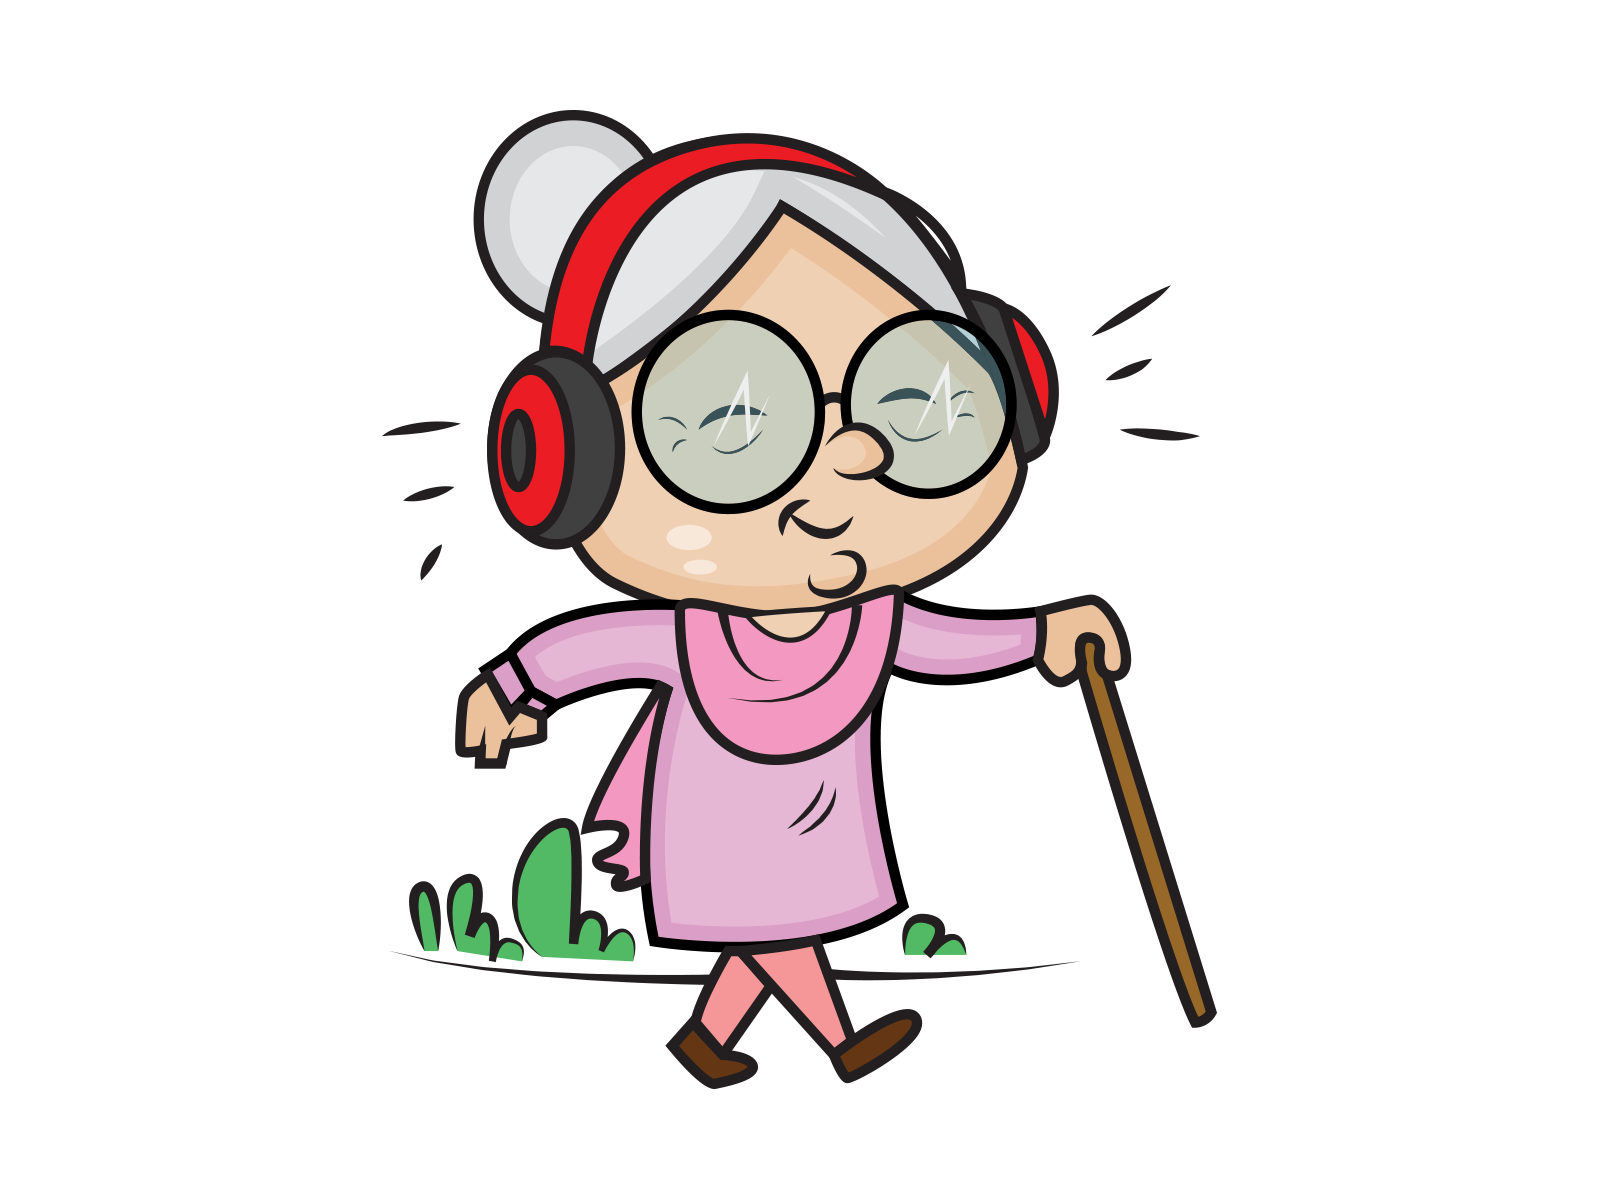 Grandmother Sticker Design by Indian Stickers on Dribbble